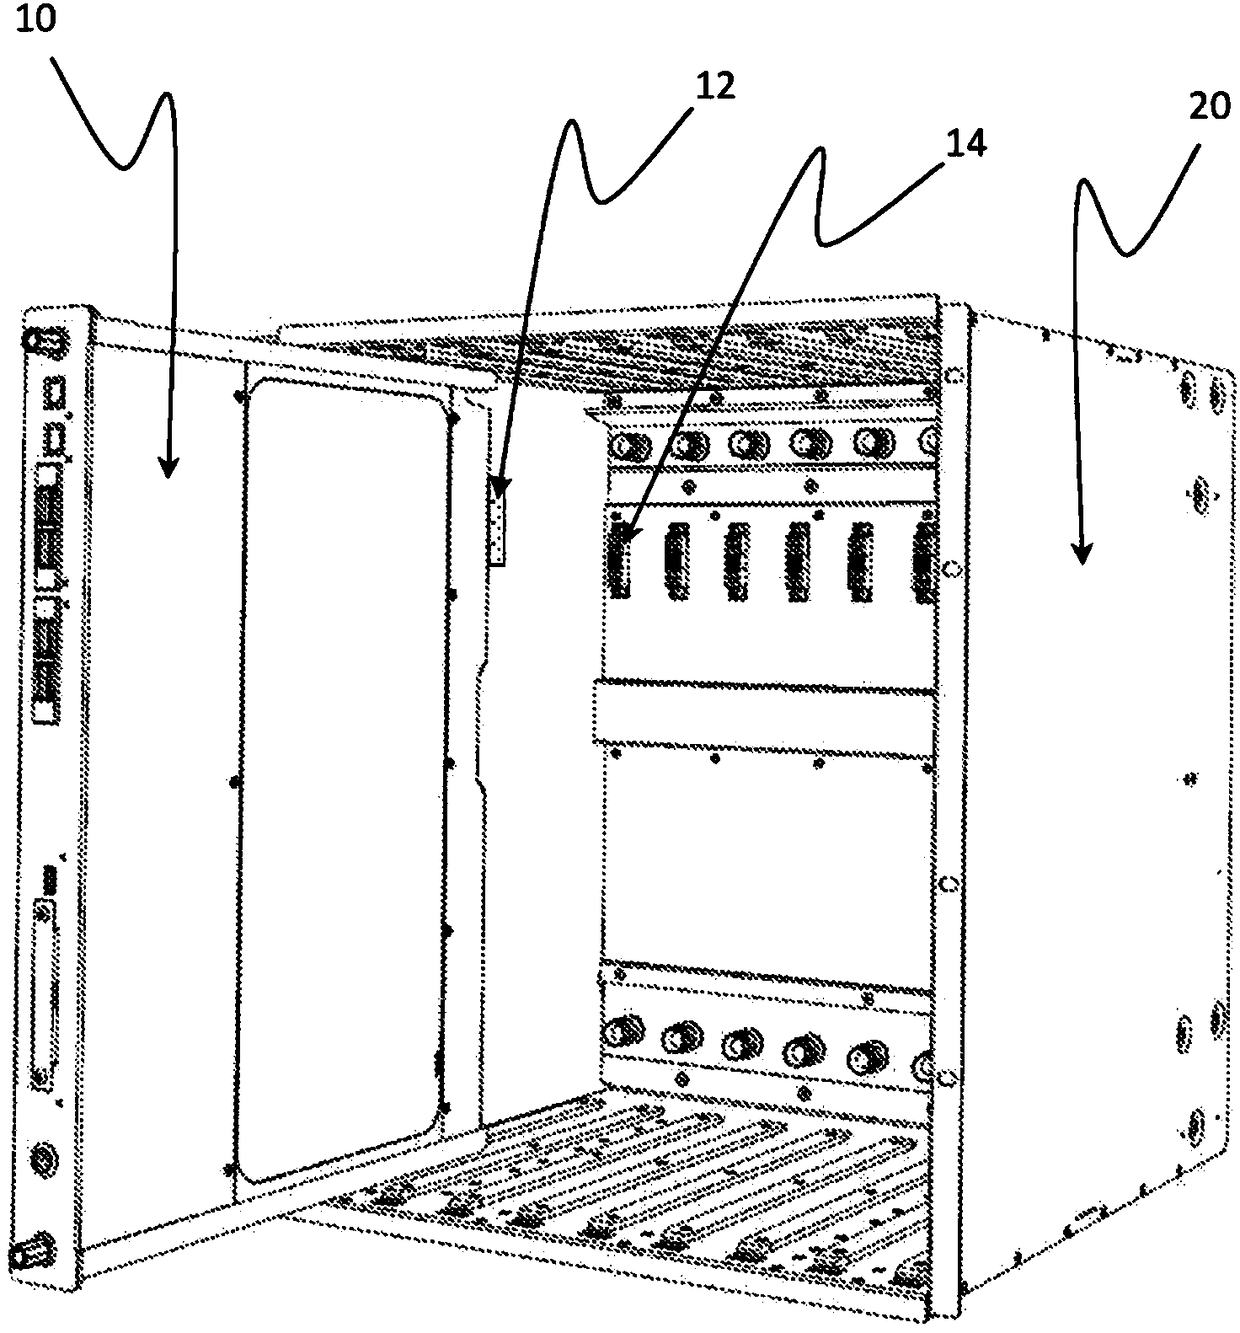 An immersion cooling system